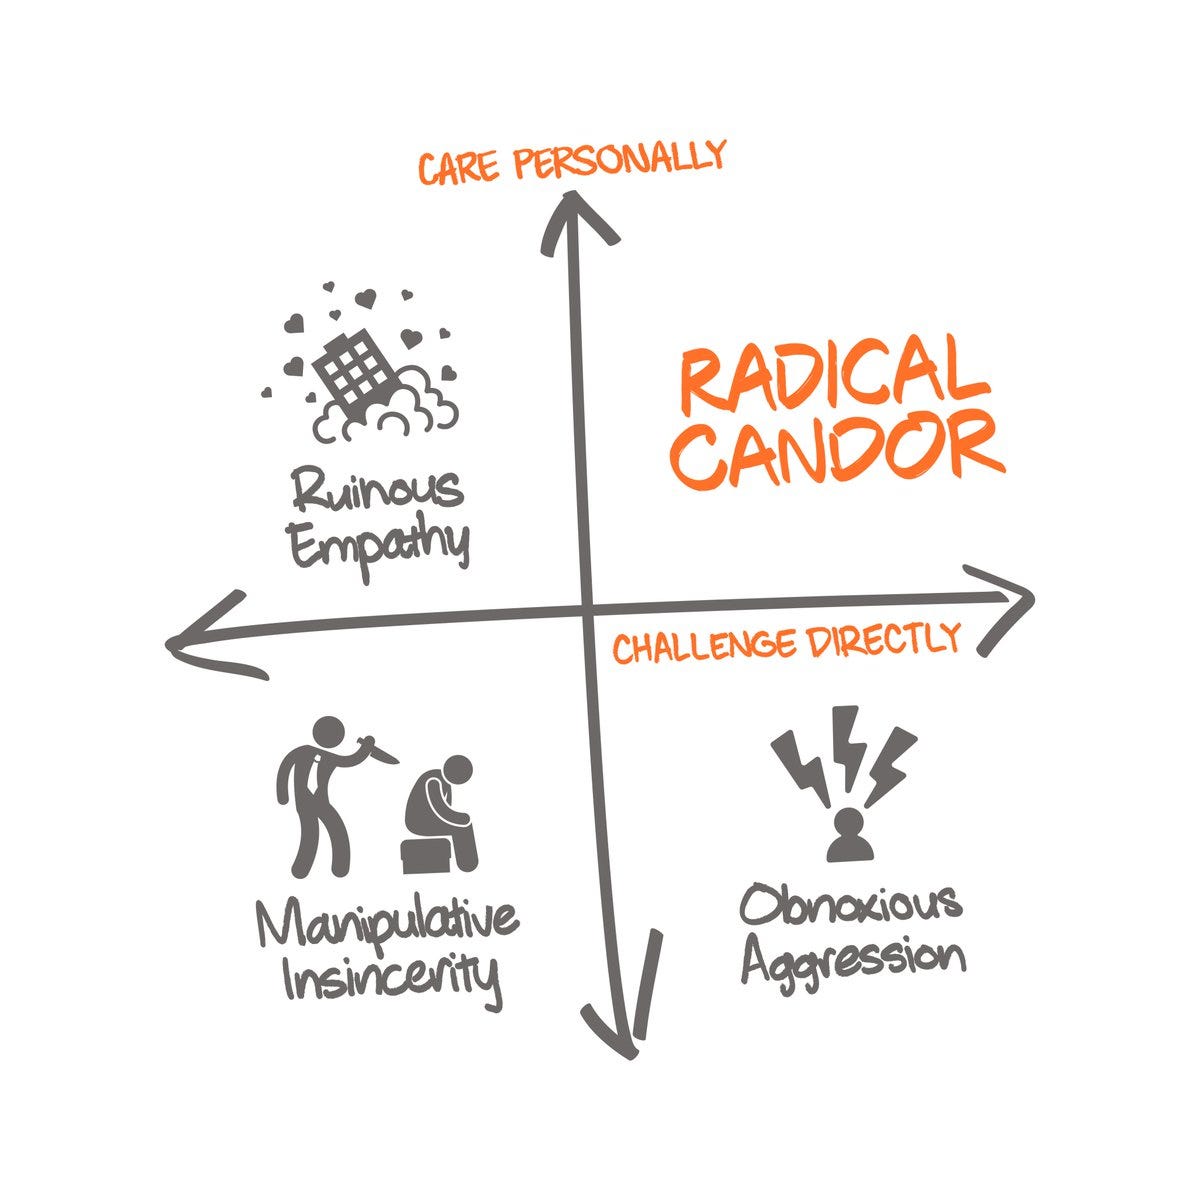 The Book — “Radical Candor” by Kim Scott, by Jean-Marie Buchilly